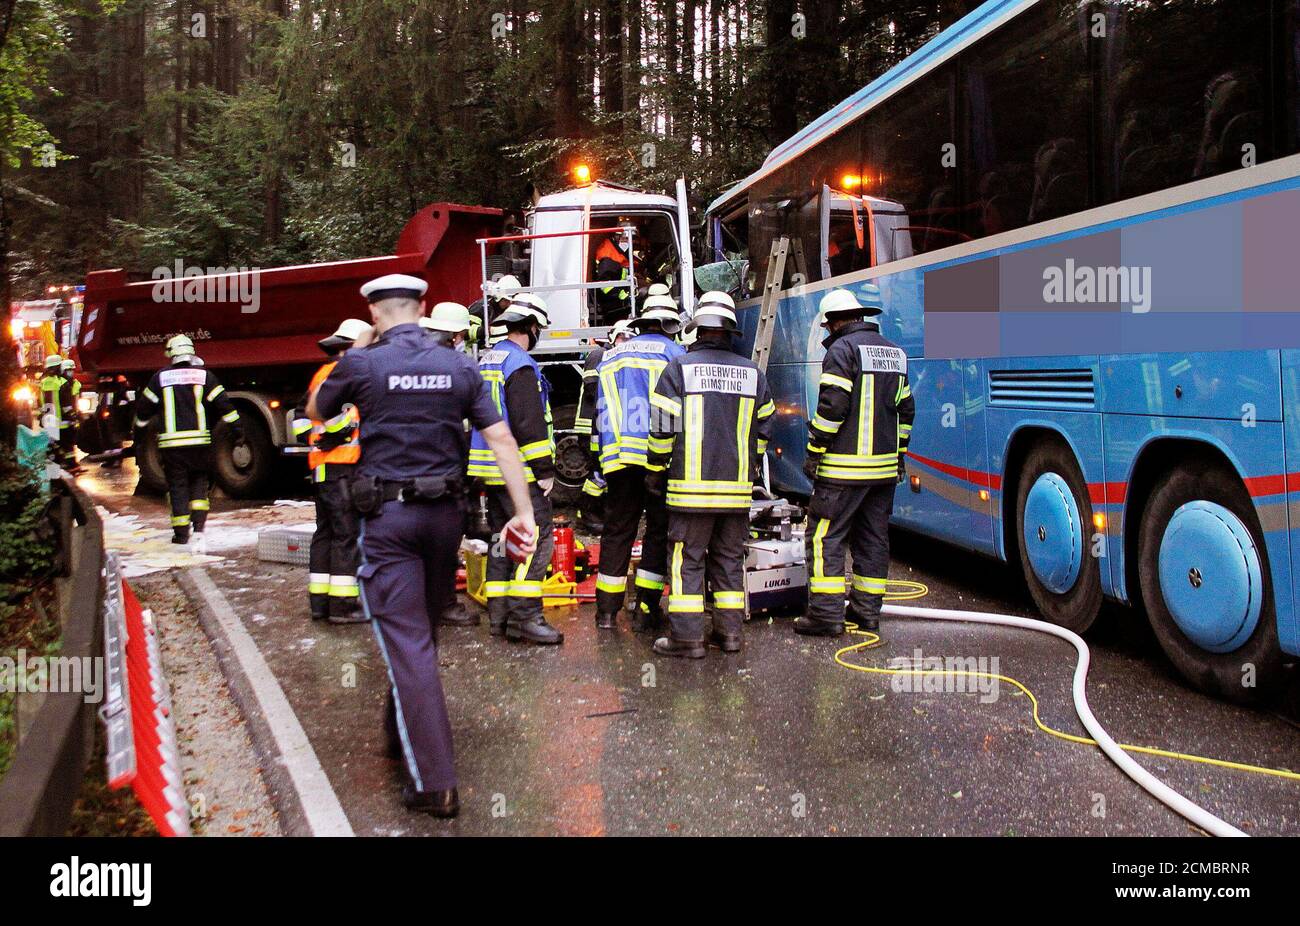 Breitbrunn, Germany. 17th Sep, 2020. Police and firefighters are working at an accident site. A truck driver crashed head-on into a school bus in the Rosenheim district. The impact trapped the man in his truck, and he was flown to hospital with serious injuries. The 41-year-old driver of the school bus was taken to hospital with moderate injuries. At the time of the accident there were no students on the bus. Credit: Josef Reisner/dpa/Alamy Live News Stock Photo